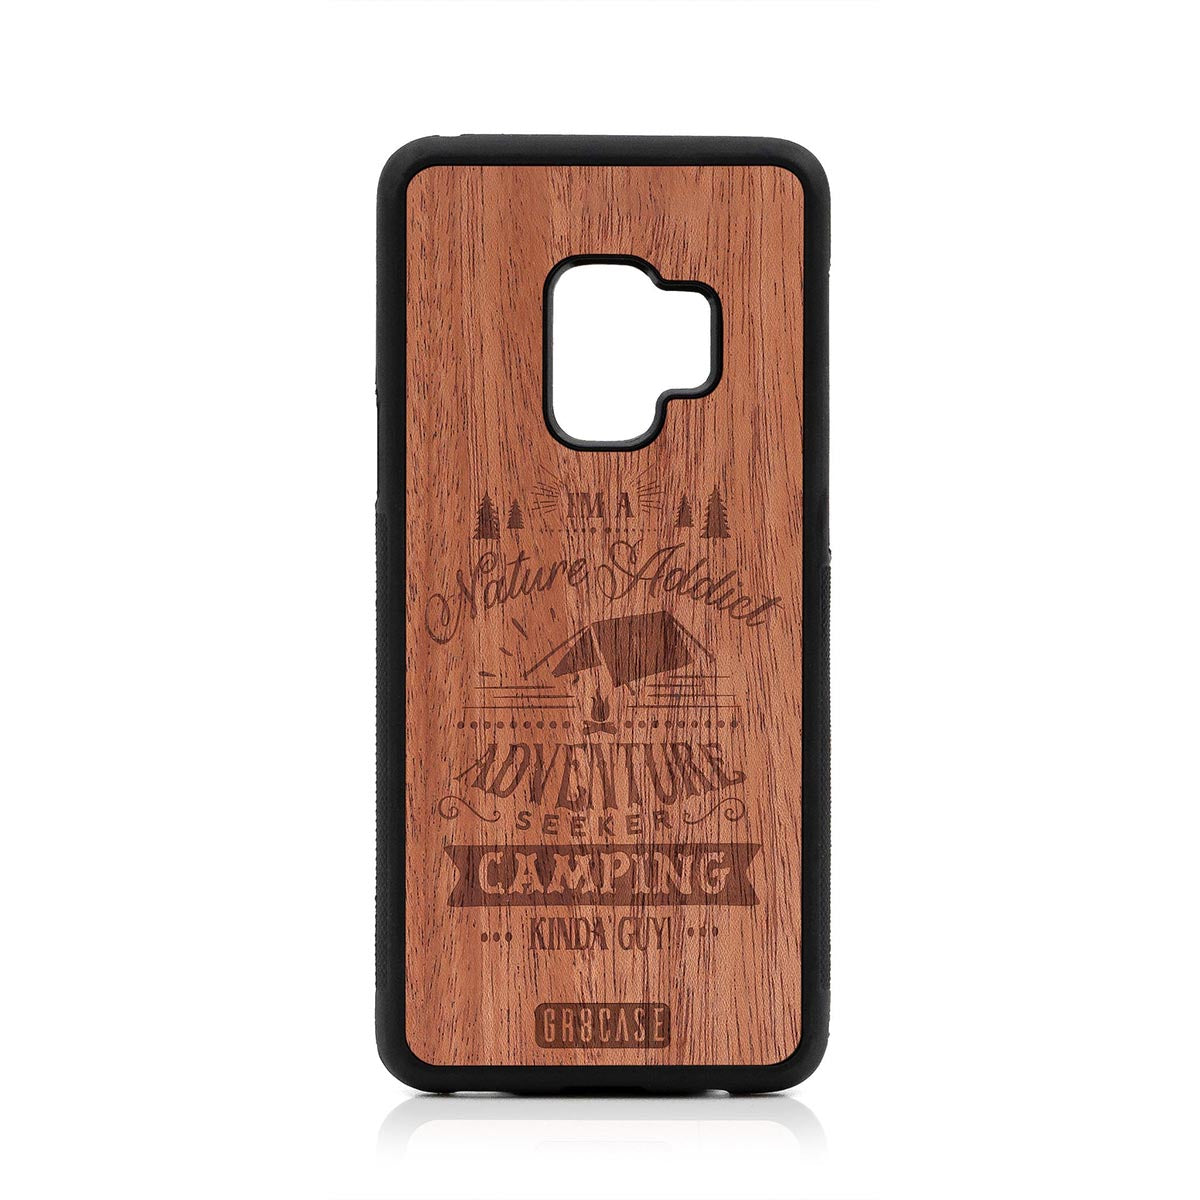 I'm A Nature Addict Adventure Seeker Camping Kinda Guy Design Wood Case Samsung Galaxy S9 by GR8CASE